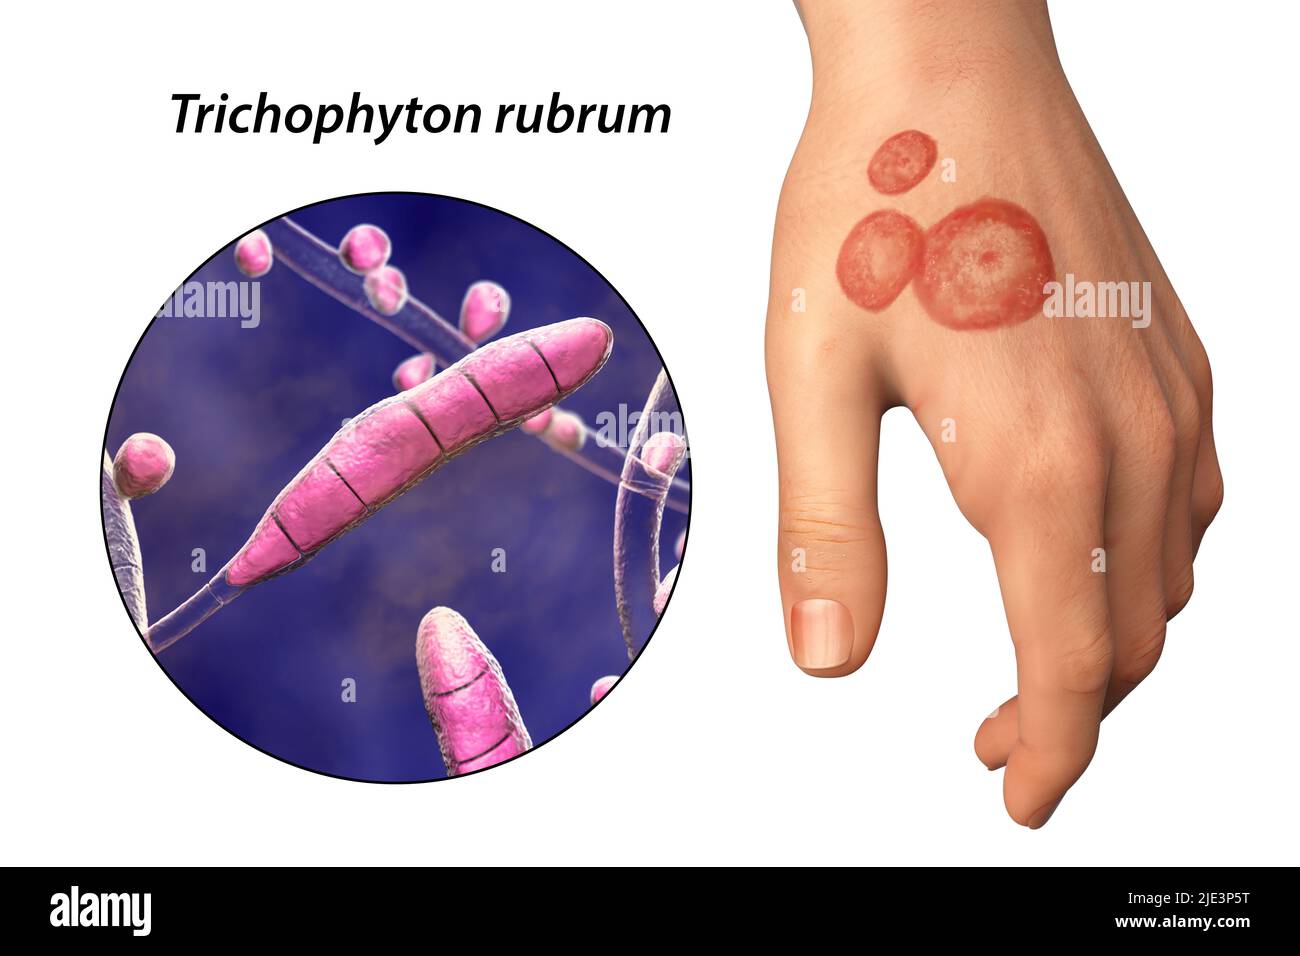 Fungal infection on a man's hand, illustration. Known as ringworm infection, or tinea manuum. It can be caused by various fungi, including Trichophyton rubrum. It causes severe itching. The disease is highly contagious, and can be spread by direct contact or by contact with contaminated material. Treatment is with antifungal drugs. Stock Photo